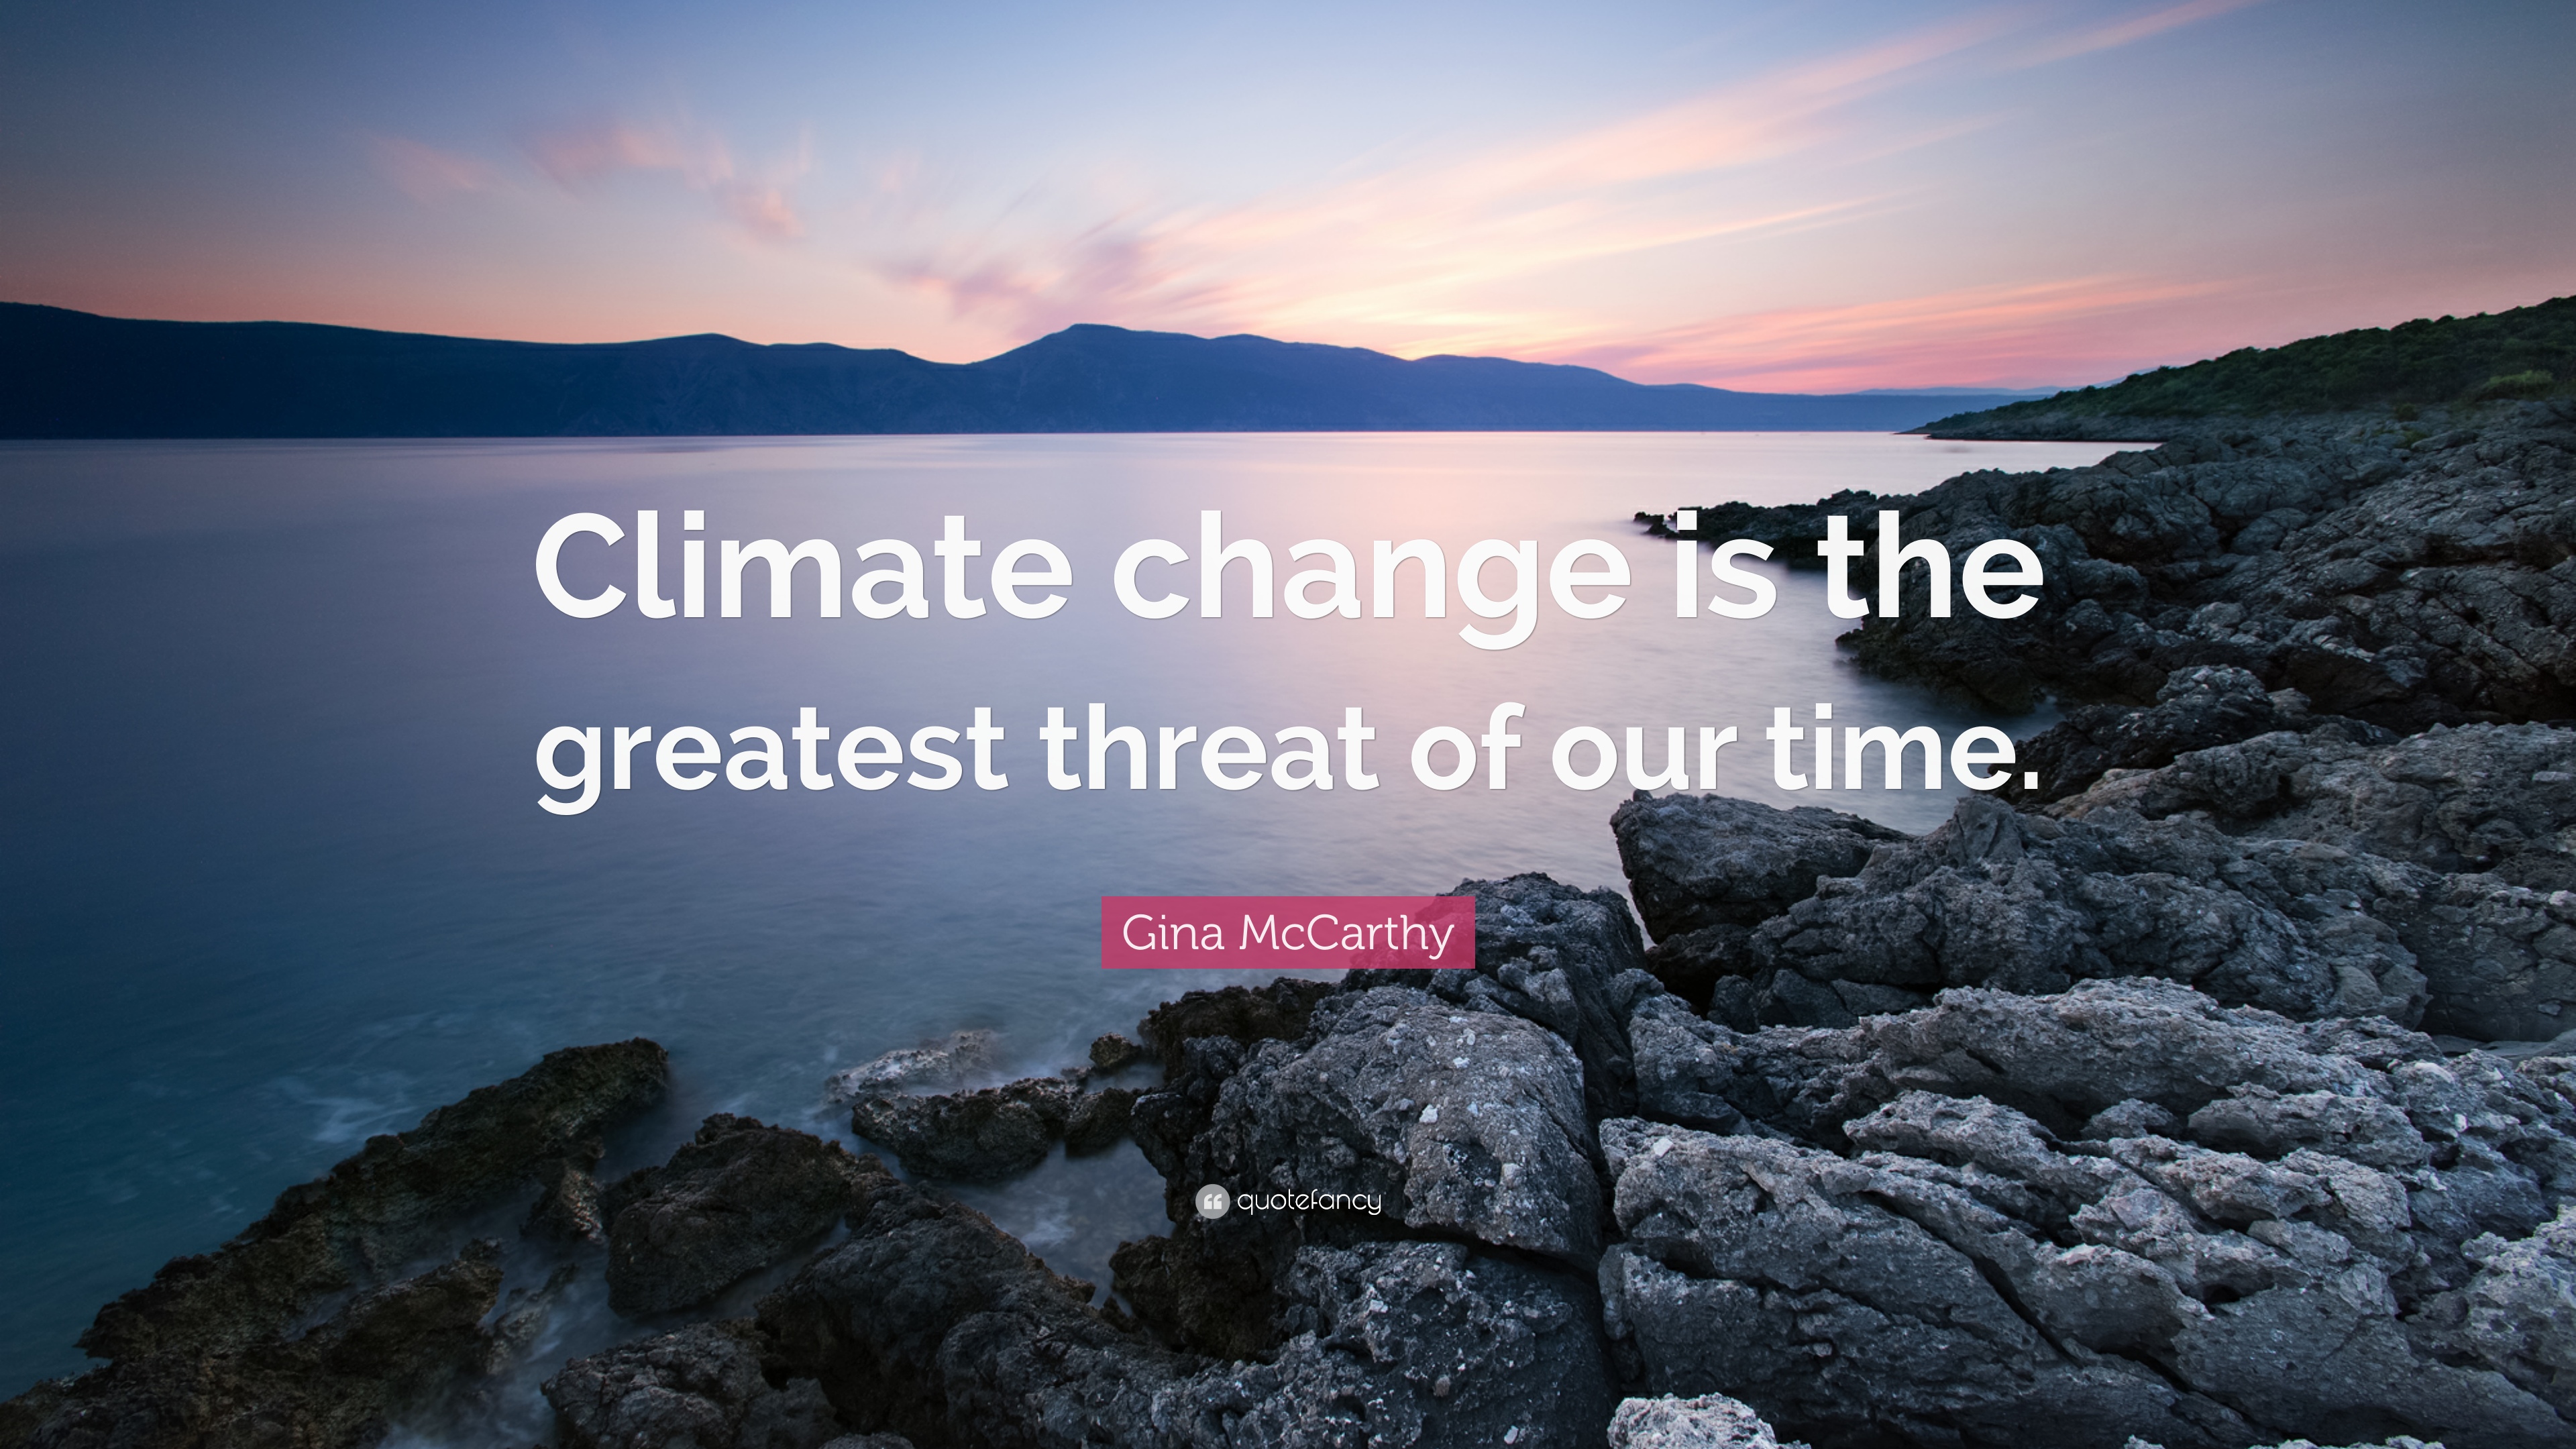 Gina McCarthy Quote: “Climate change is the greatest threat of our